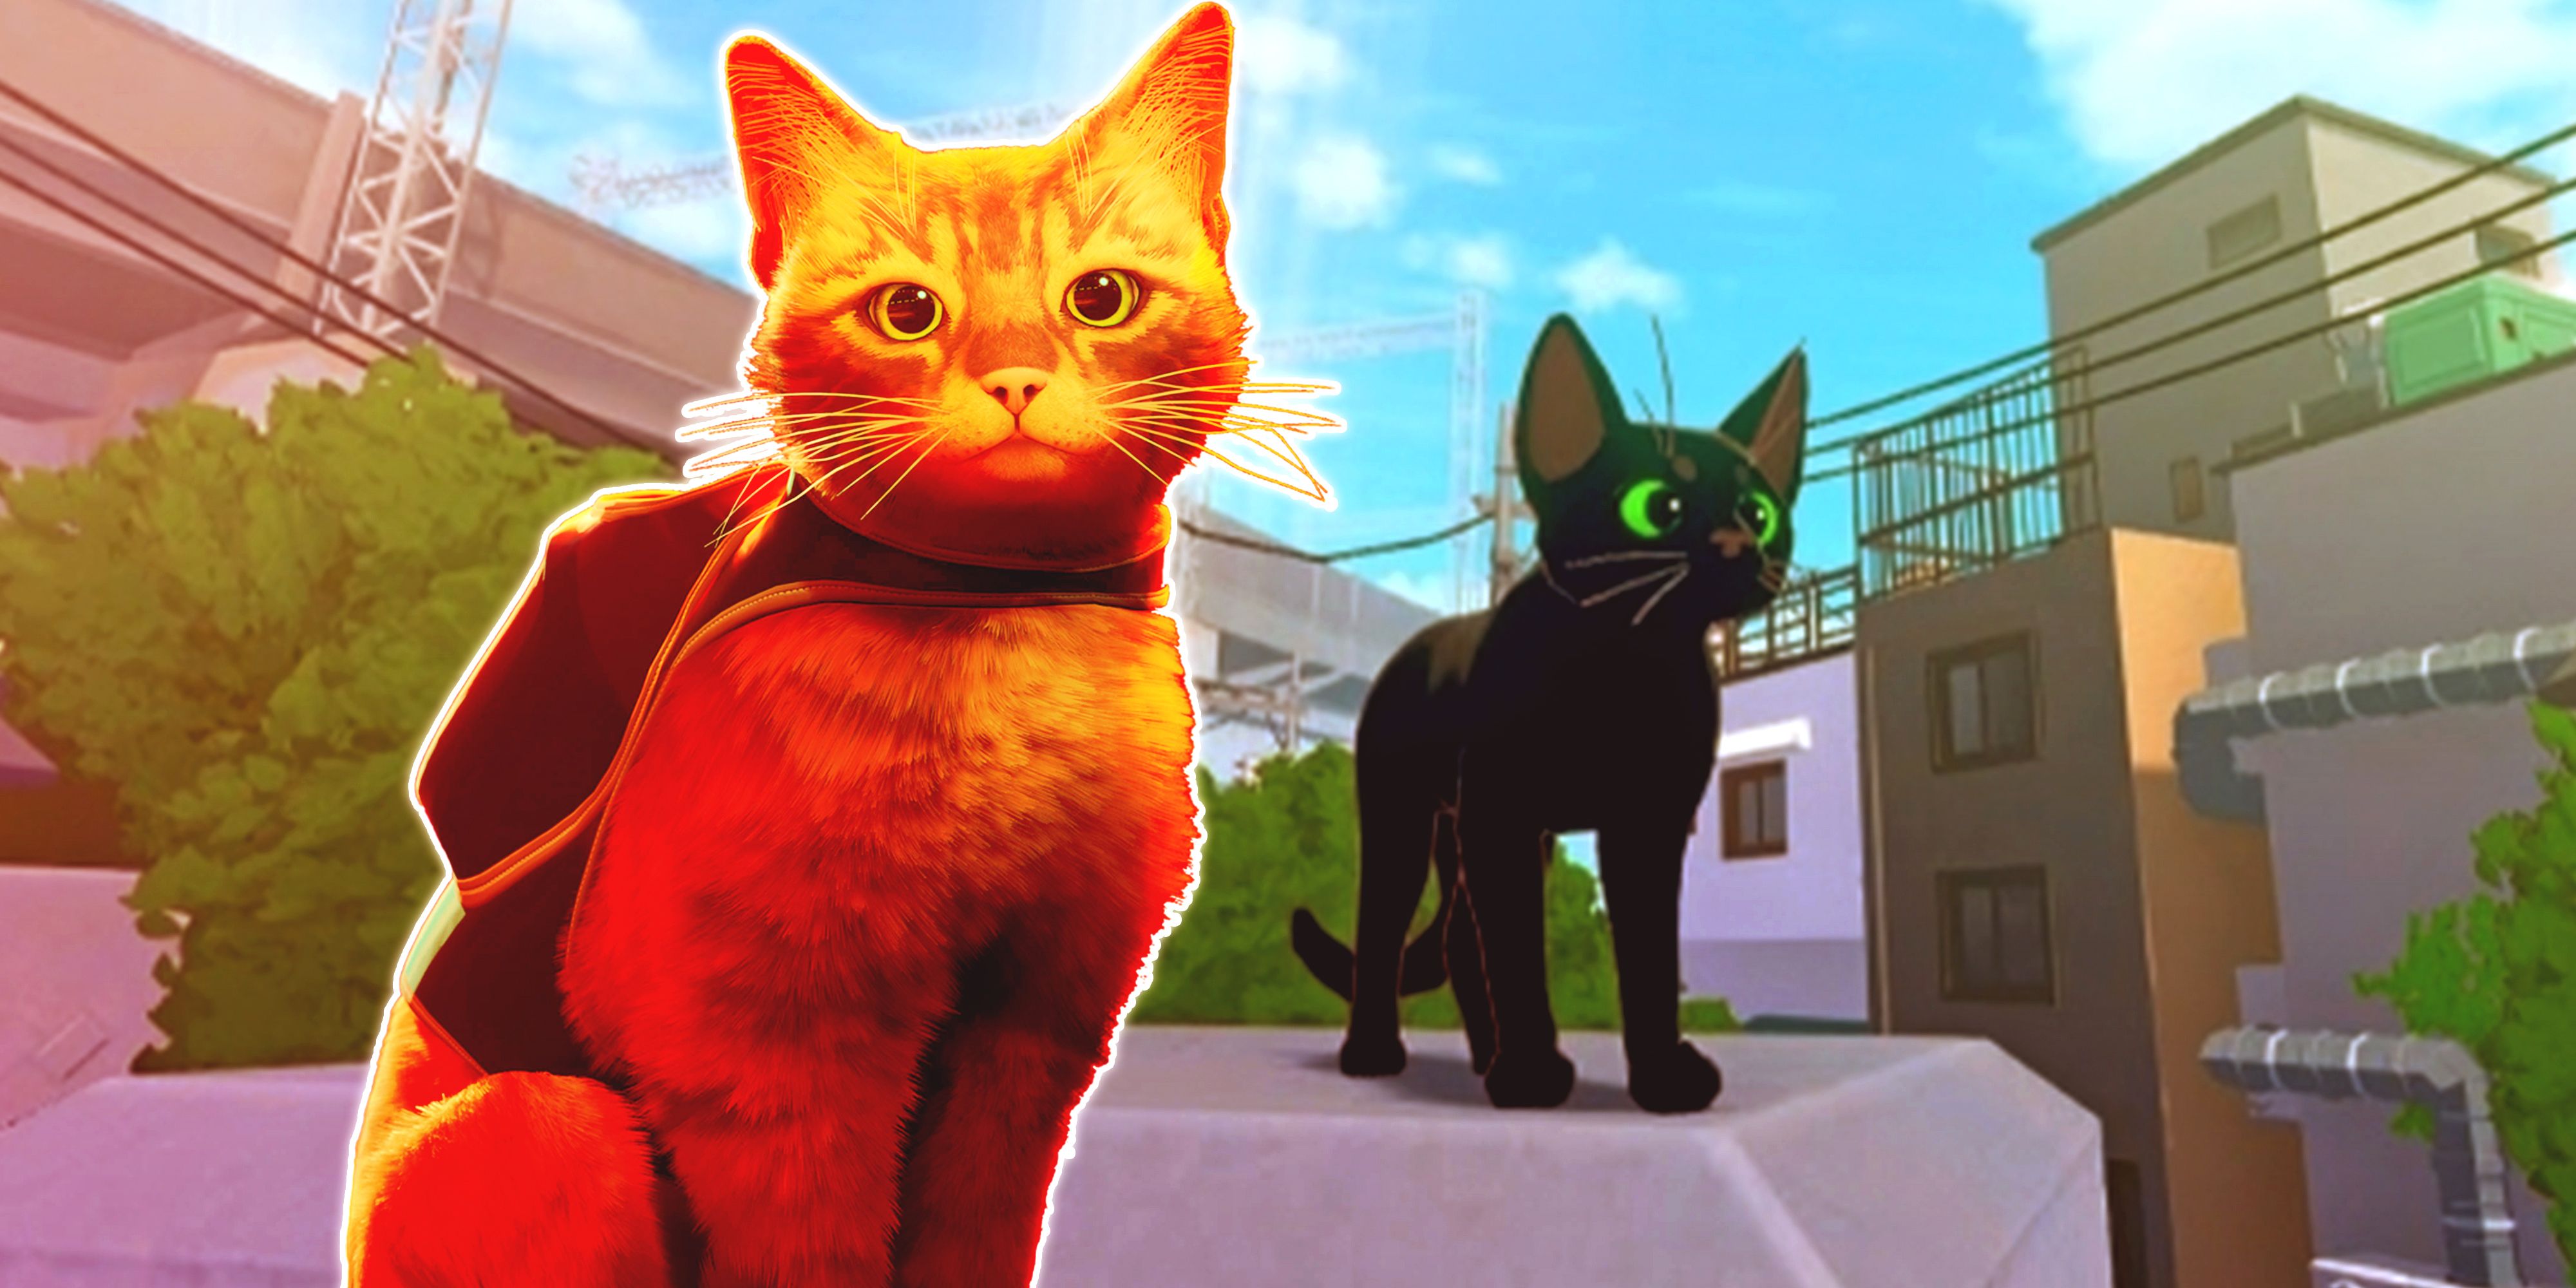 A screenshot from Little Kitty Big City showing the black cat, with the orange cat from Stray in the foreground